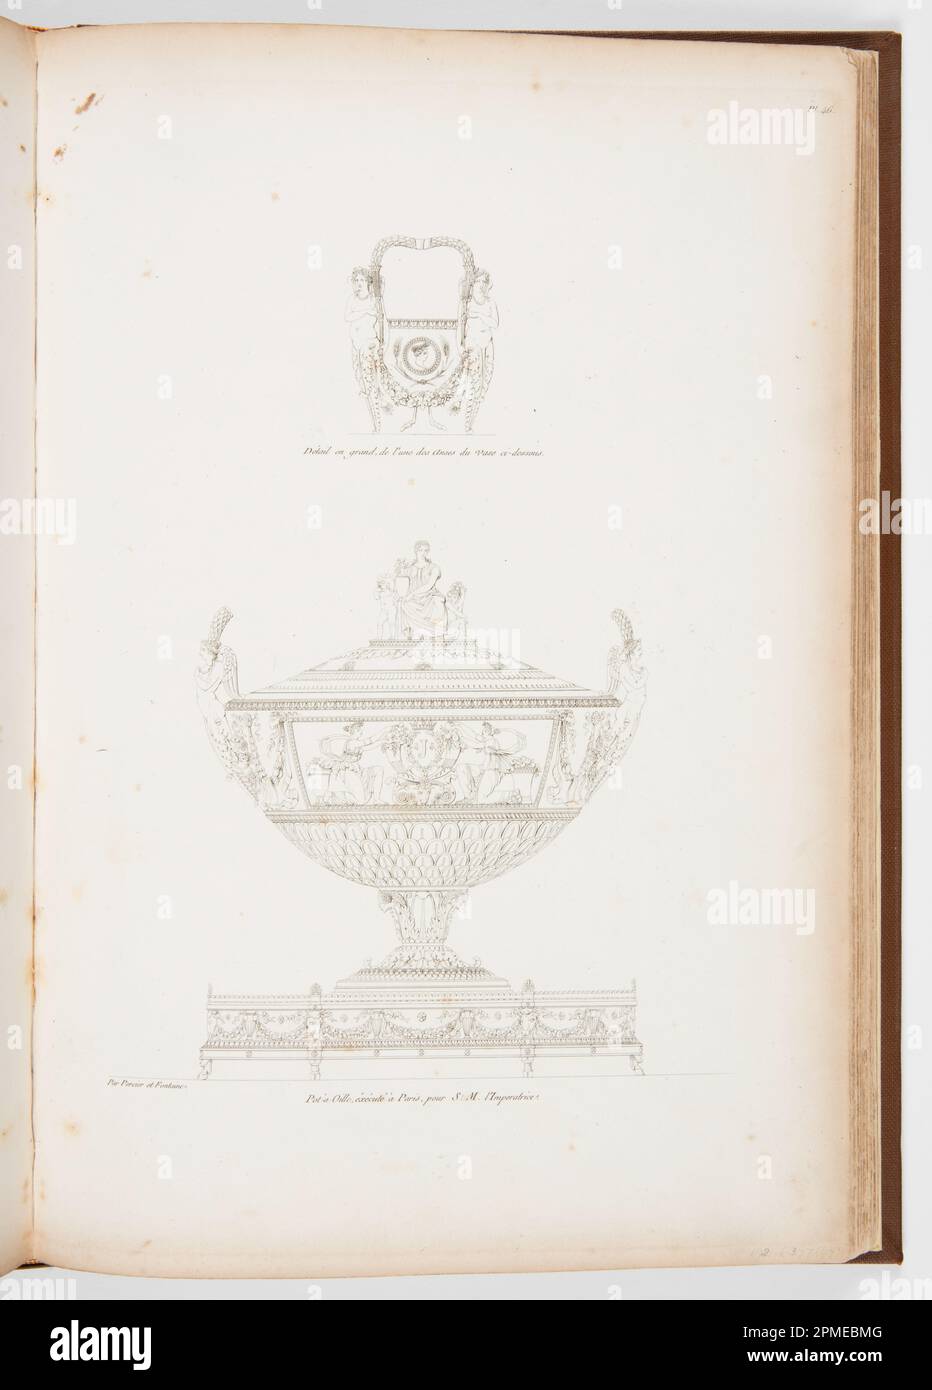 Print, Pot-à-Oille (Design for a Tureen with Handle for the Empress Josephine), plate 46, in Recueil de decorations intérieures (Collection of Interior Decorations); Designed by Charles Percier (French, 1764–1838), Pierre-François-Léonard Fontaine (French, 1762–1853); France; etching on cream wove paper; Open: 40.6 × 57.2 × 4.4 cm (16 in. × 22 1/2 in. × 1 3/4 in.) H x W: 40.5 × 27.5 cm (15 15/16 × 10 13/16 in.) Platemark: 37.8 × 26.4 cm (14 7/8 × 10 3/8 in.) Stock Photo